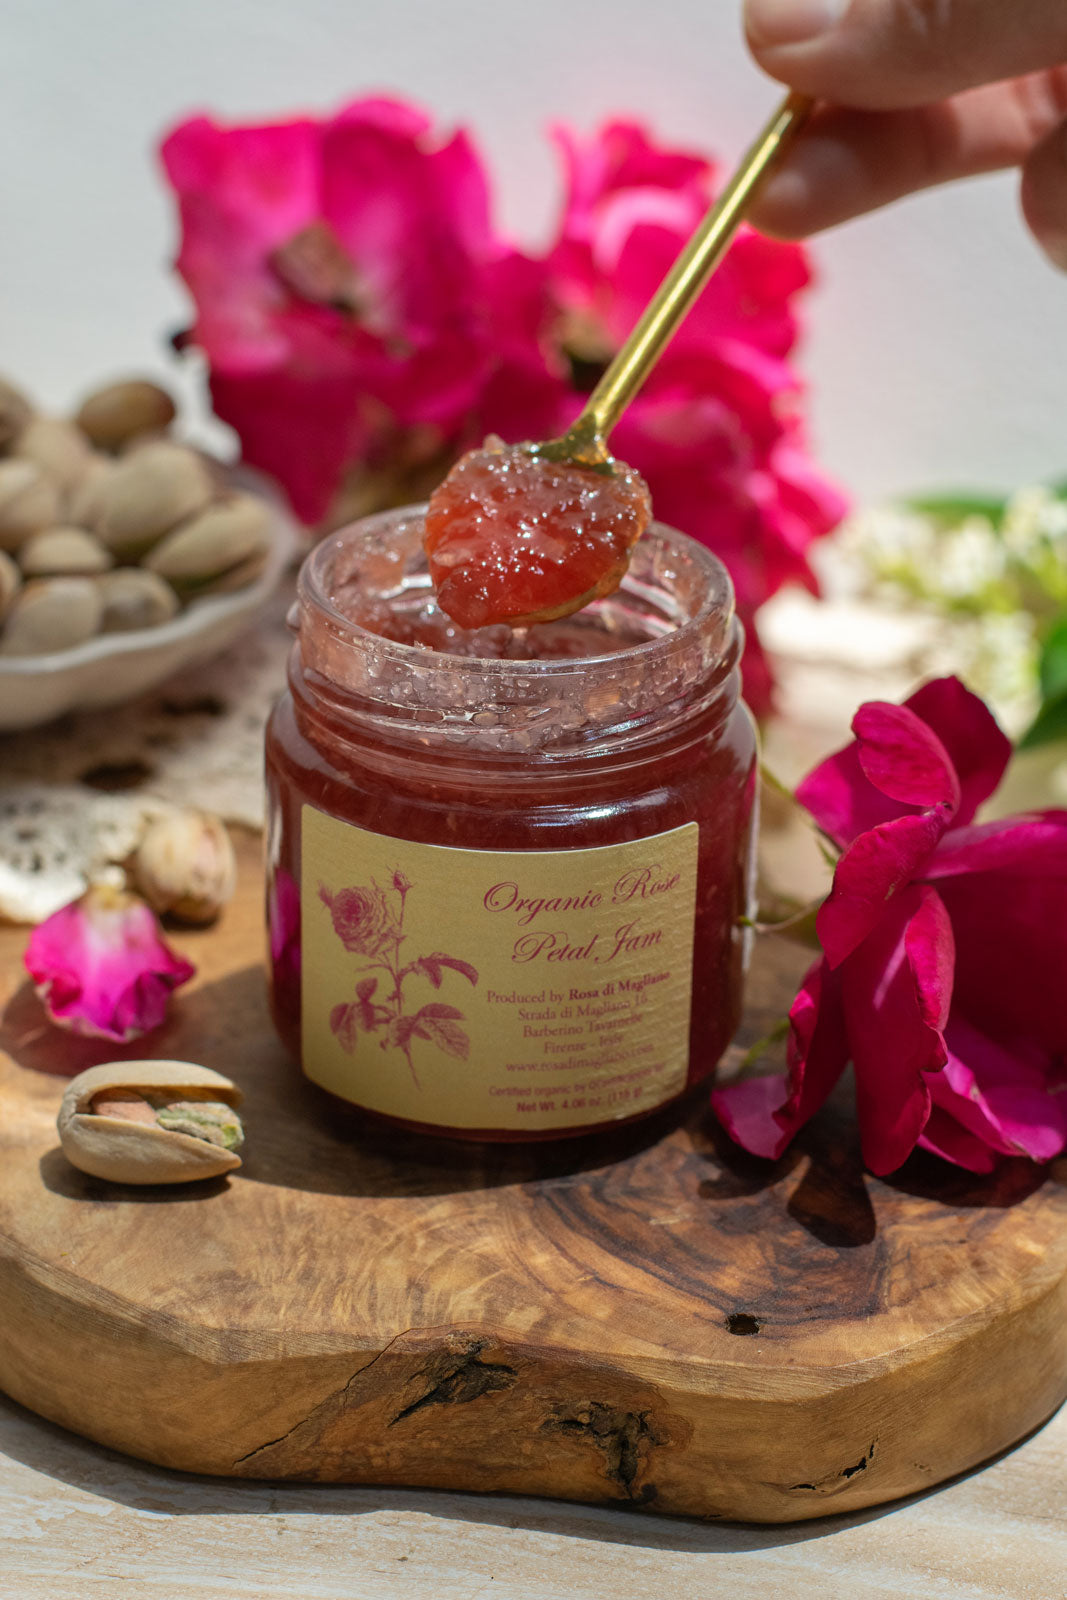 Open jar of Organic Rose Petal Jam, artfully displayed on a live edge wooden charcuterie board next to roses.  Someone holds a small spoonful of the rose jam